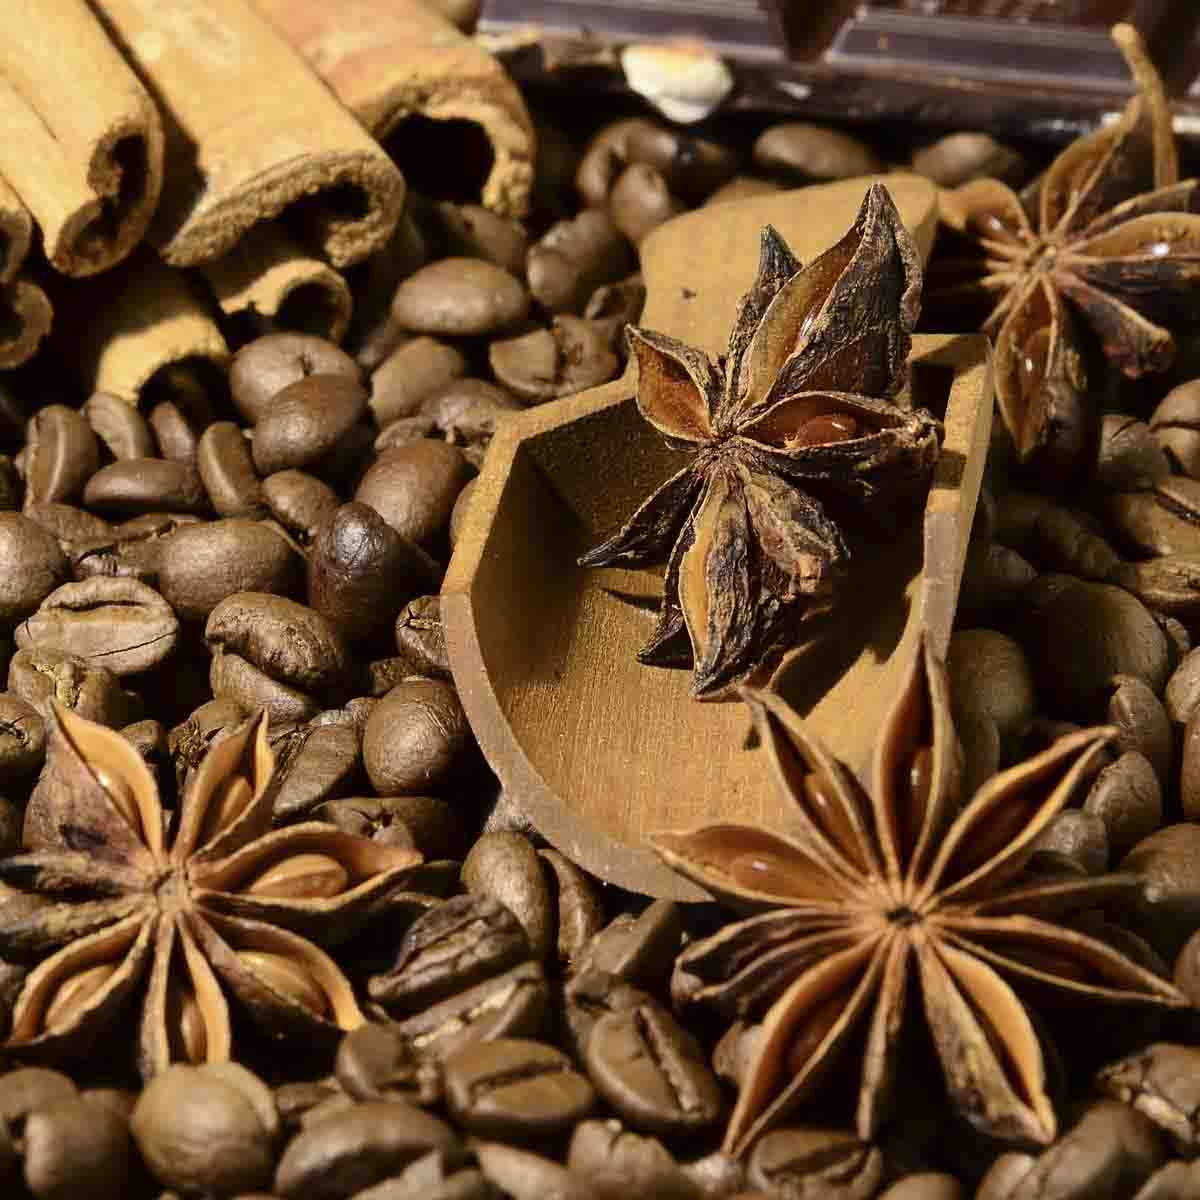 Stars of star anise decorate a pile of coffee beans.